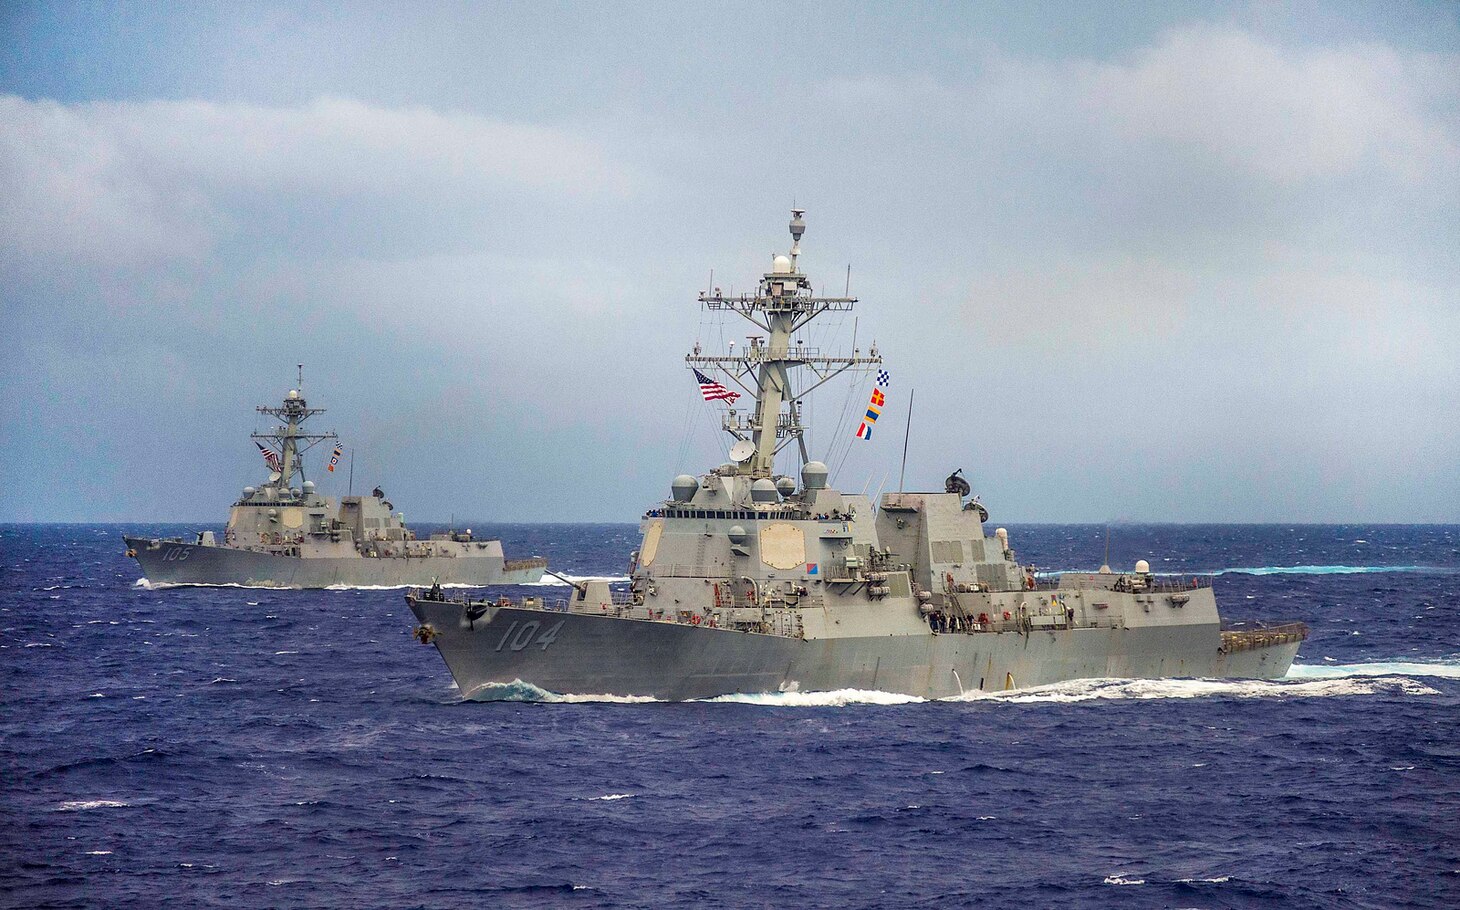 File photo:  The guided-missile destroyers USS Sterett (DDG 104), front, and USS Dewey (DDG 105) maneuver into formation during the conclusion of Valiant Shield 2014. Valiant Shield is a U.S.-only exercise integrating U.S. Navy, Air Force, Army, and Marine Corps assets, offering real-world joint operational experience to develop capabilities that provide a full range of options to defend U.S. interests and those of its allies and partners. 